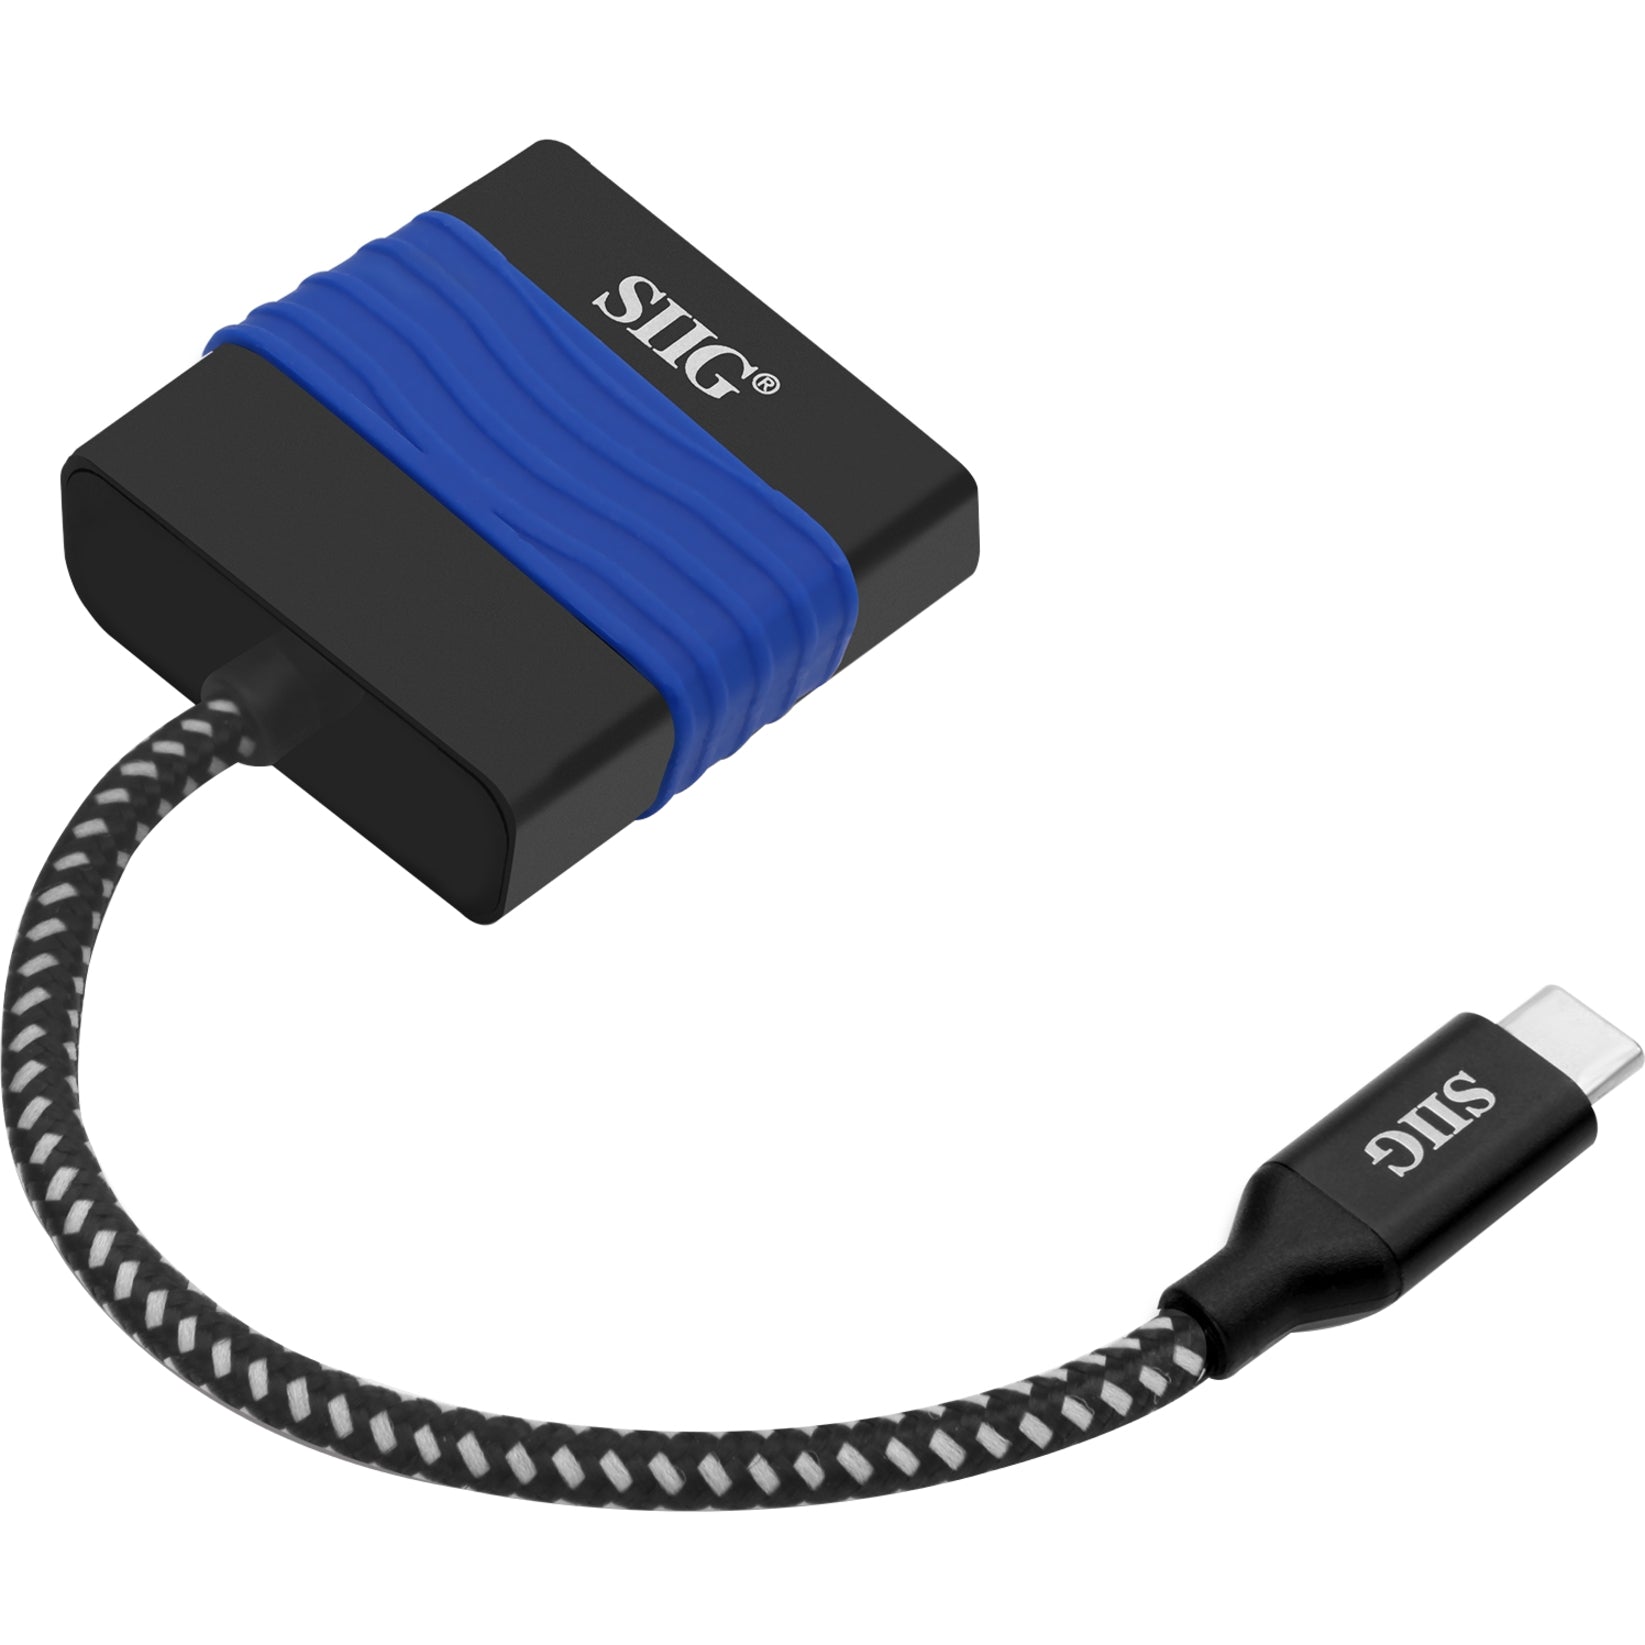 SIIG CB-TC0711-S1 USB Type-C to DVI Video Cable Adapter, Connect Your USB-C Device to a DVI Monitor